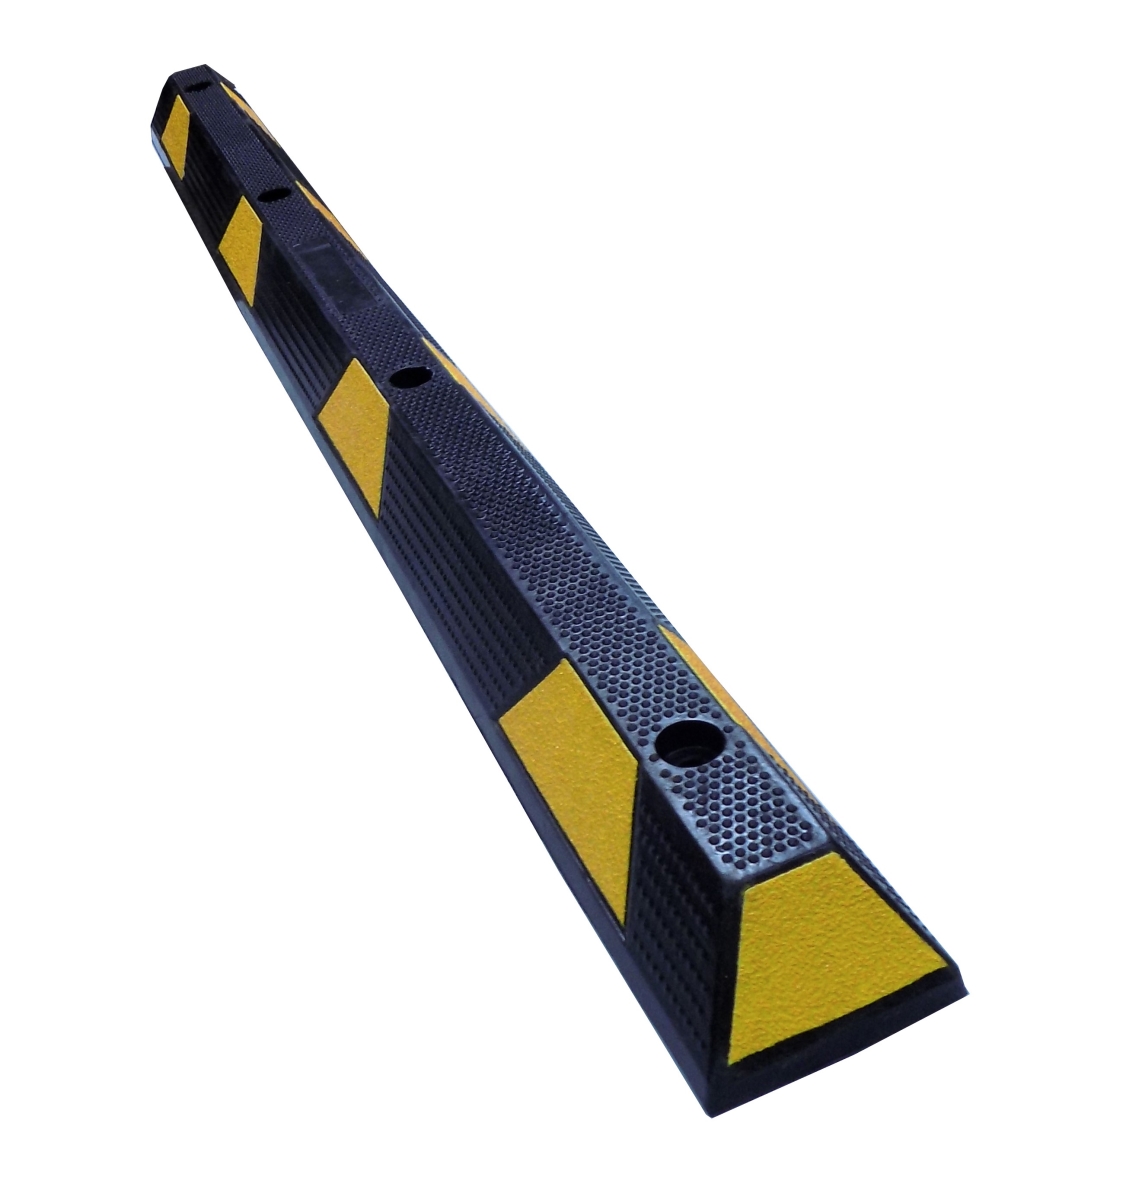 Picture of Electriduct SB-ED-PC-7320-YL-KIT-AP 6 ft. Rubber Parking Block Curb with 4X Asphalt Spikes - Black & Yellow